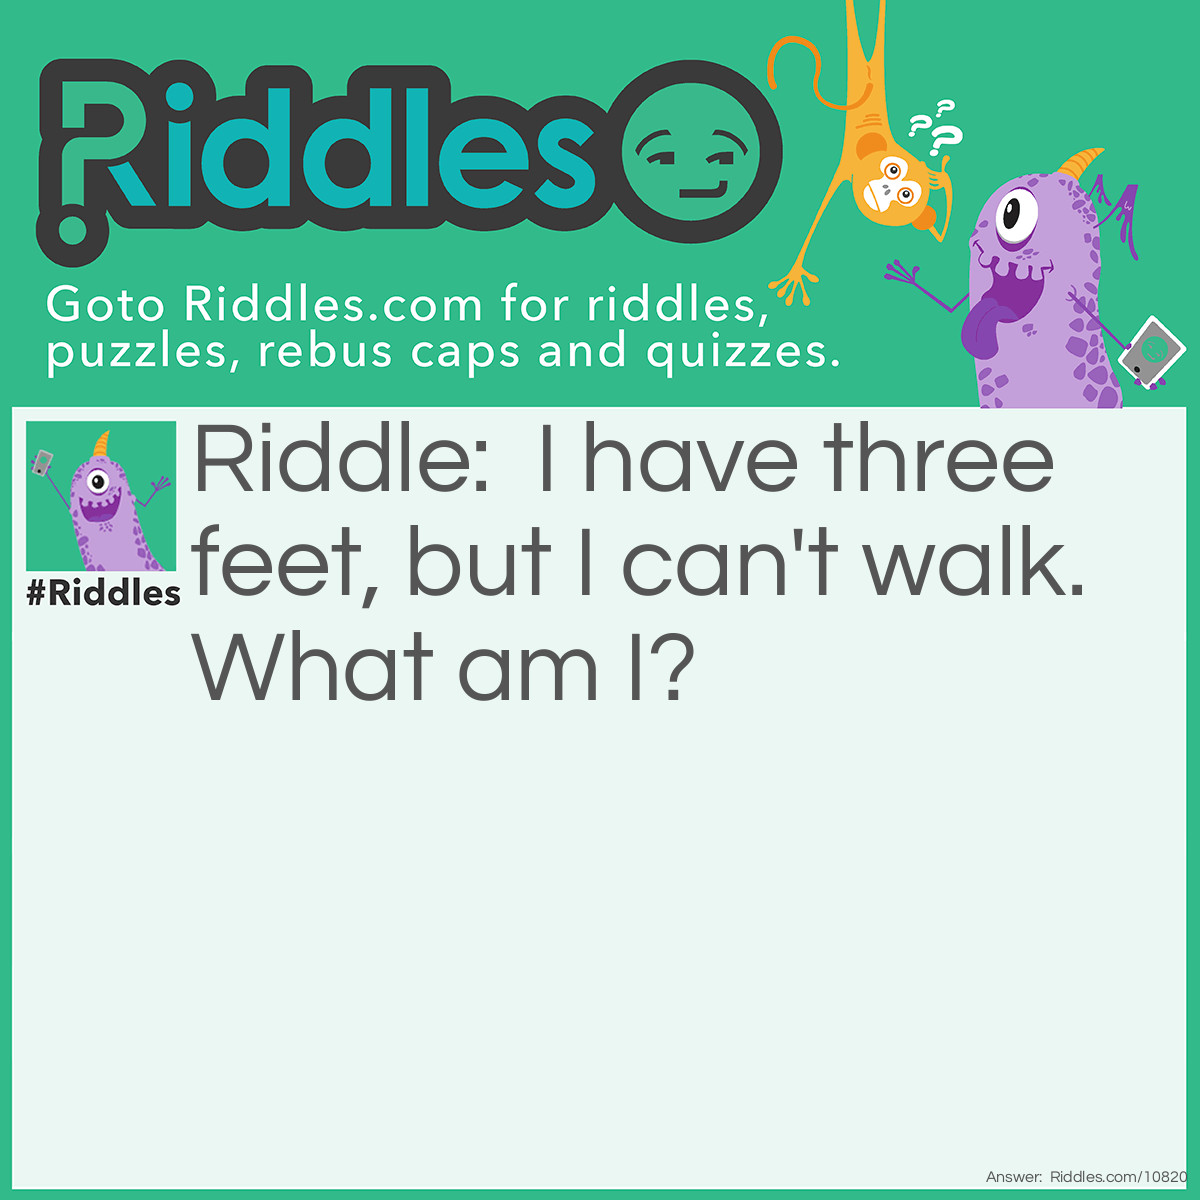 Riddle: I have three feet, but I can't walk. What am I? Answer: A yardstick.